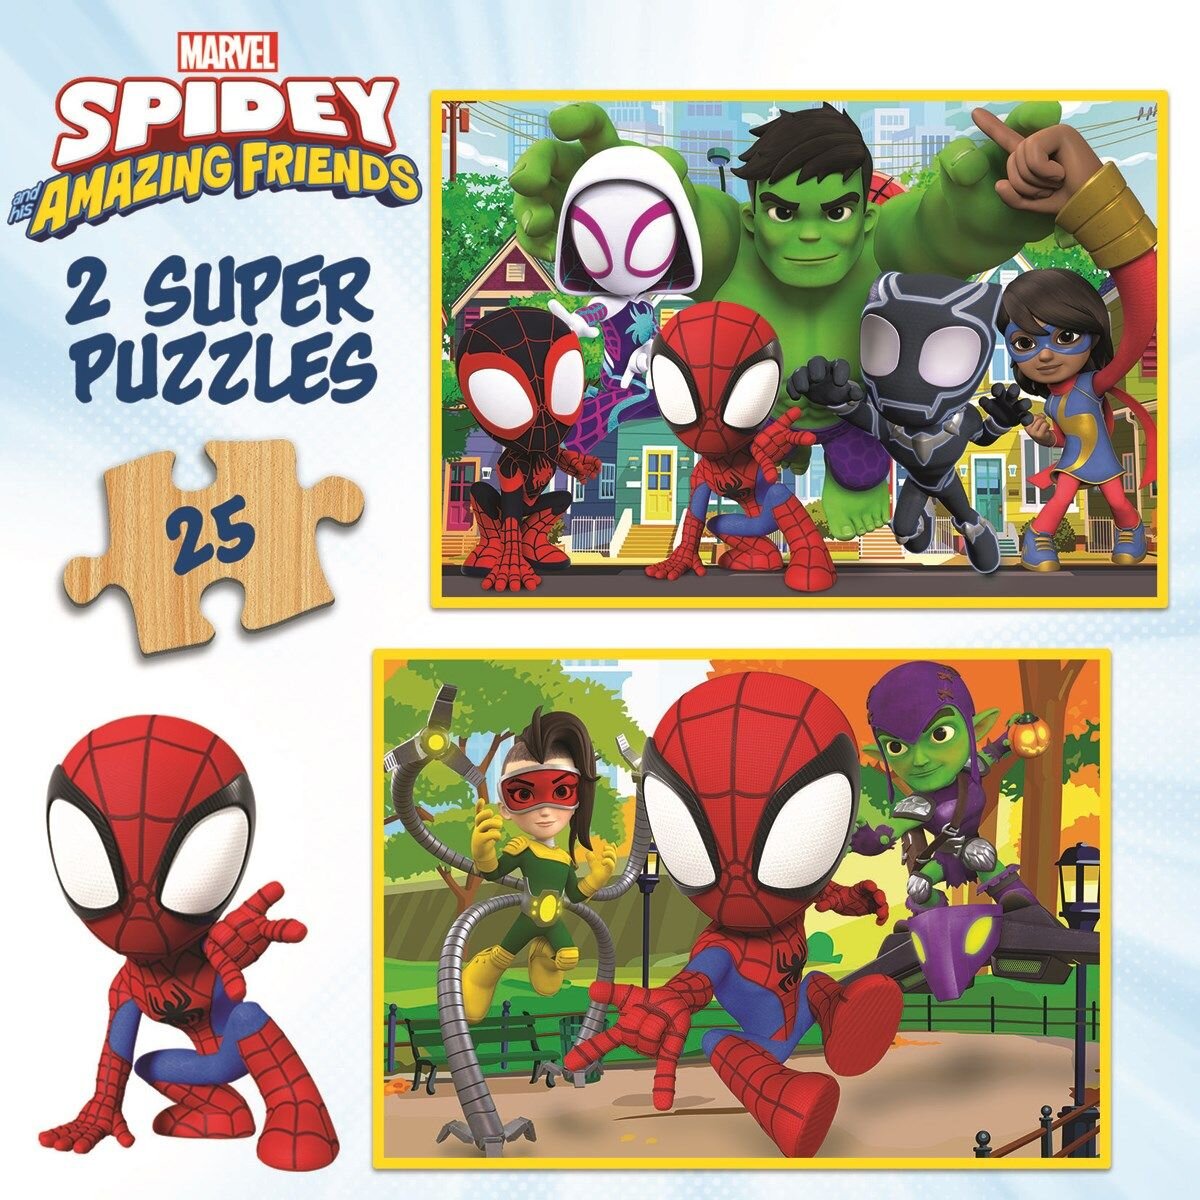 Educa Puslespill, Spidey & His Amazing Friends 2x25 brikker